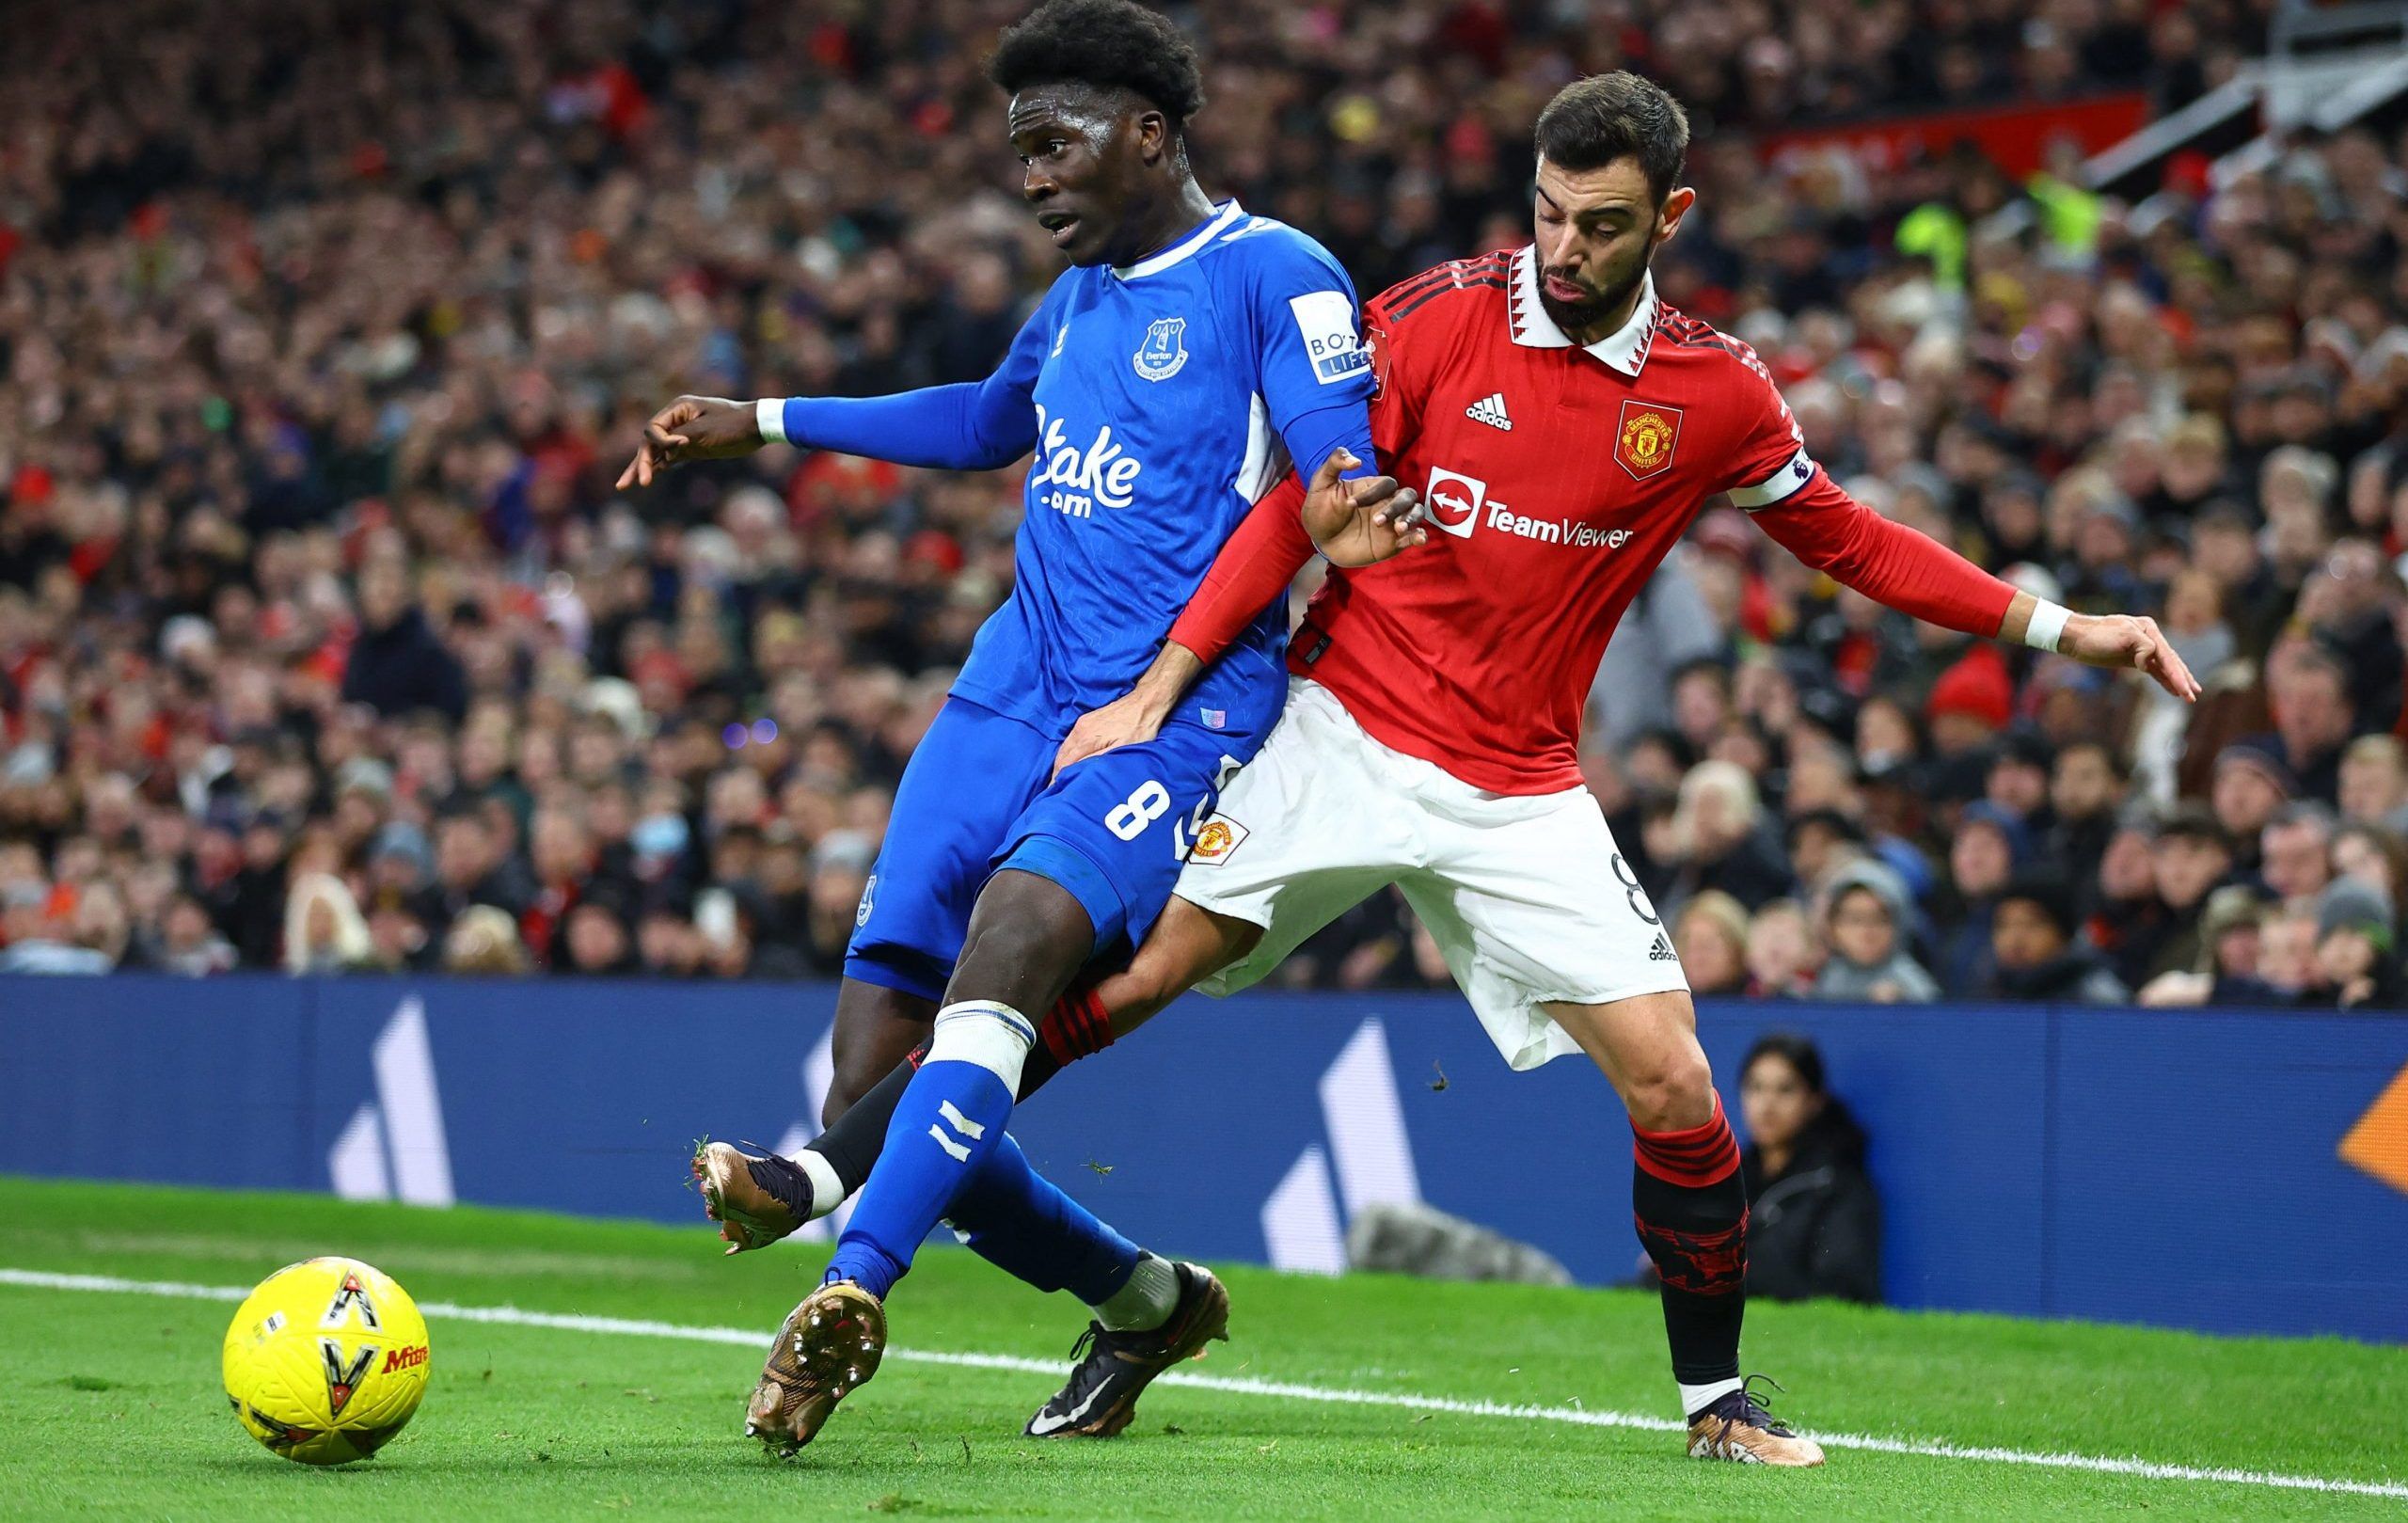 Soccer Football - FA Cup Third Round - Manchester United v Everton - Old Trafford, Manchester, Britain - January 6, 2023 Everton's Amadou Onana in action with Manchester United's Bruno Fernandes REUTERS/Carl Recine